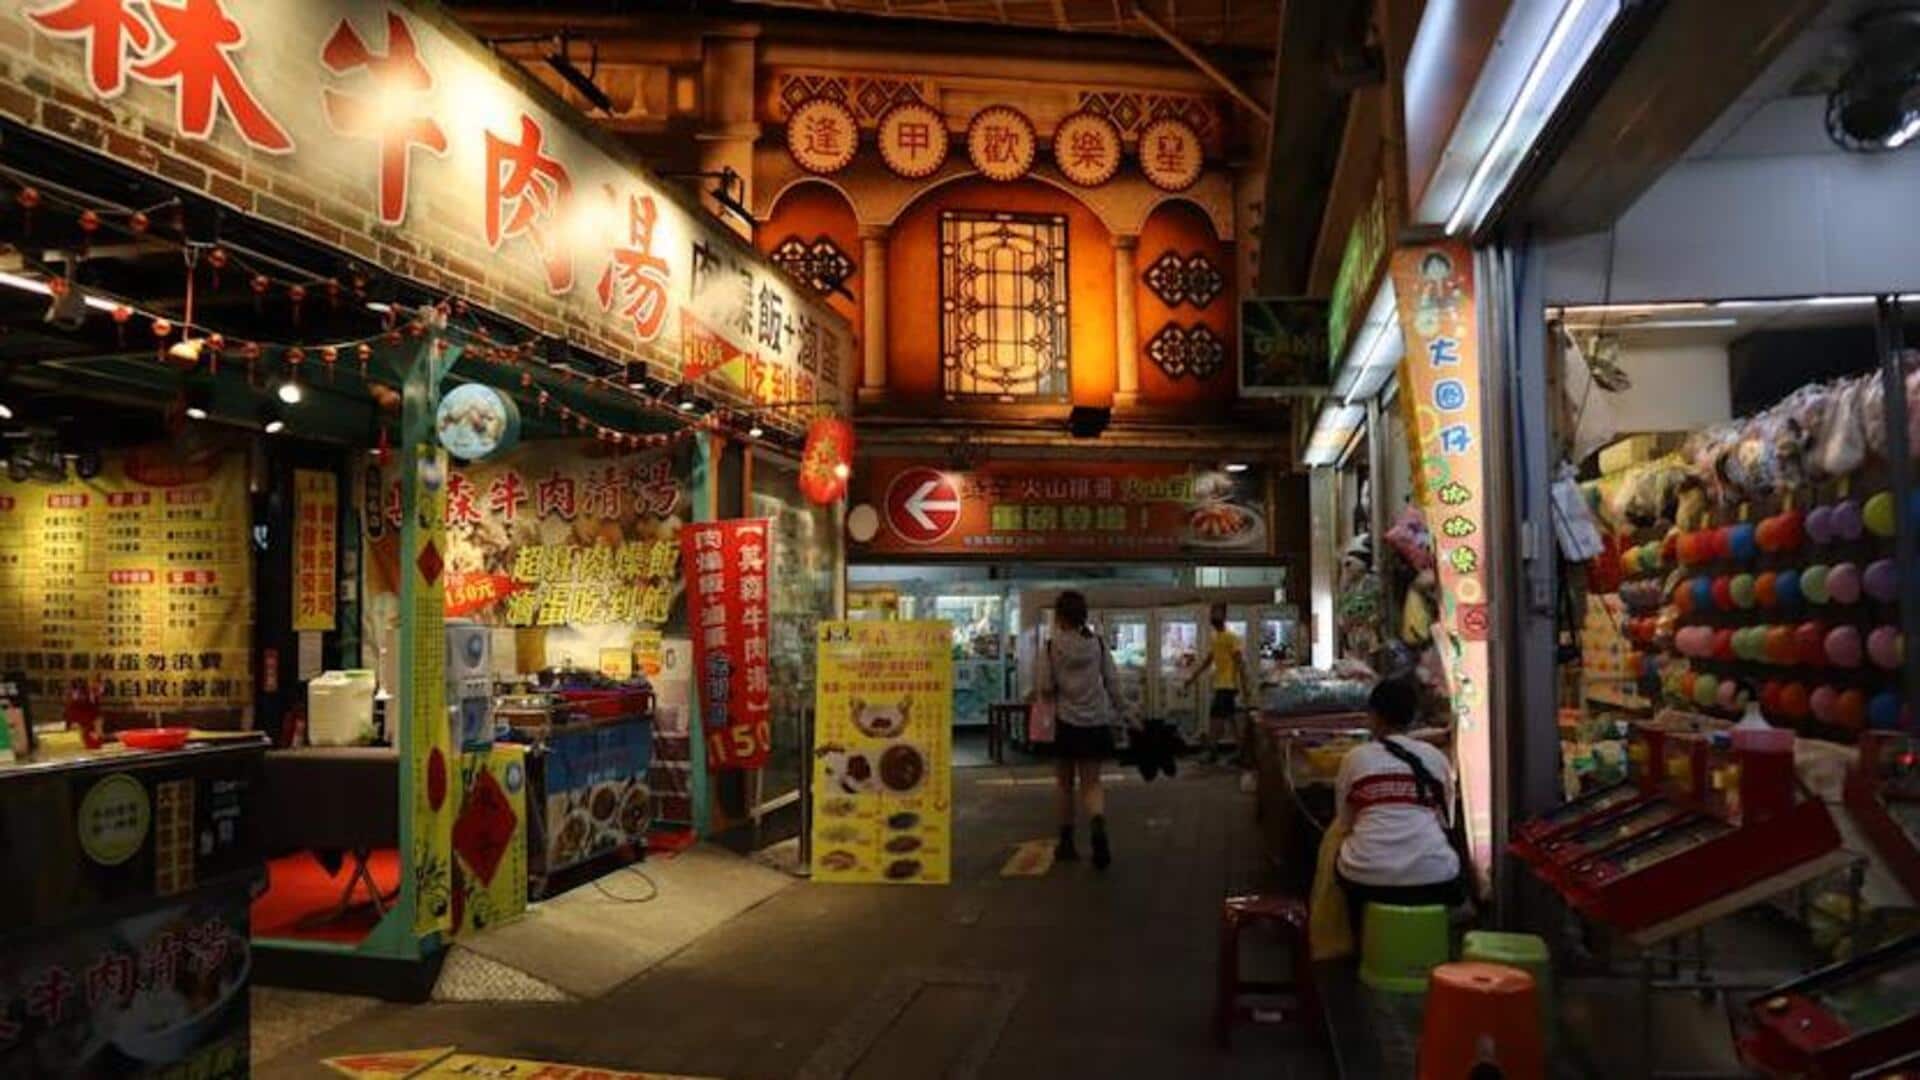 Taipei's night markets are a feast for the senses